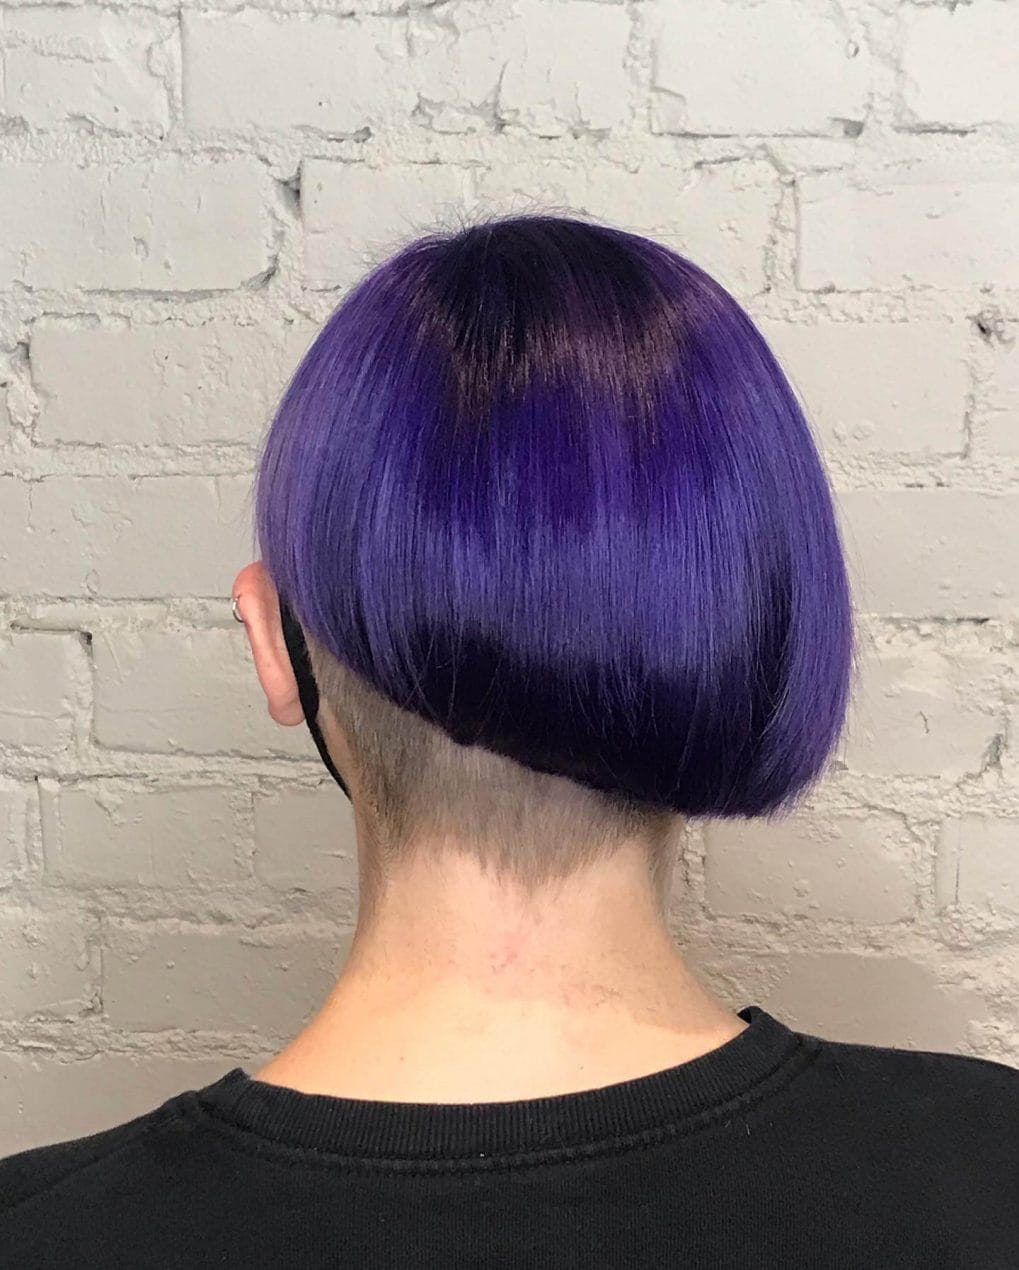 Vibrant violet bob with a smooth, rounded silhouette and a sharply shaved undercut.
